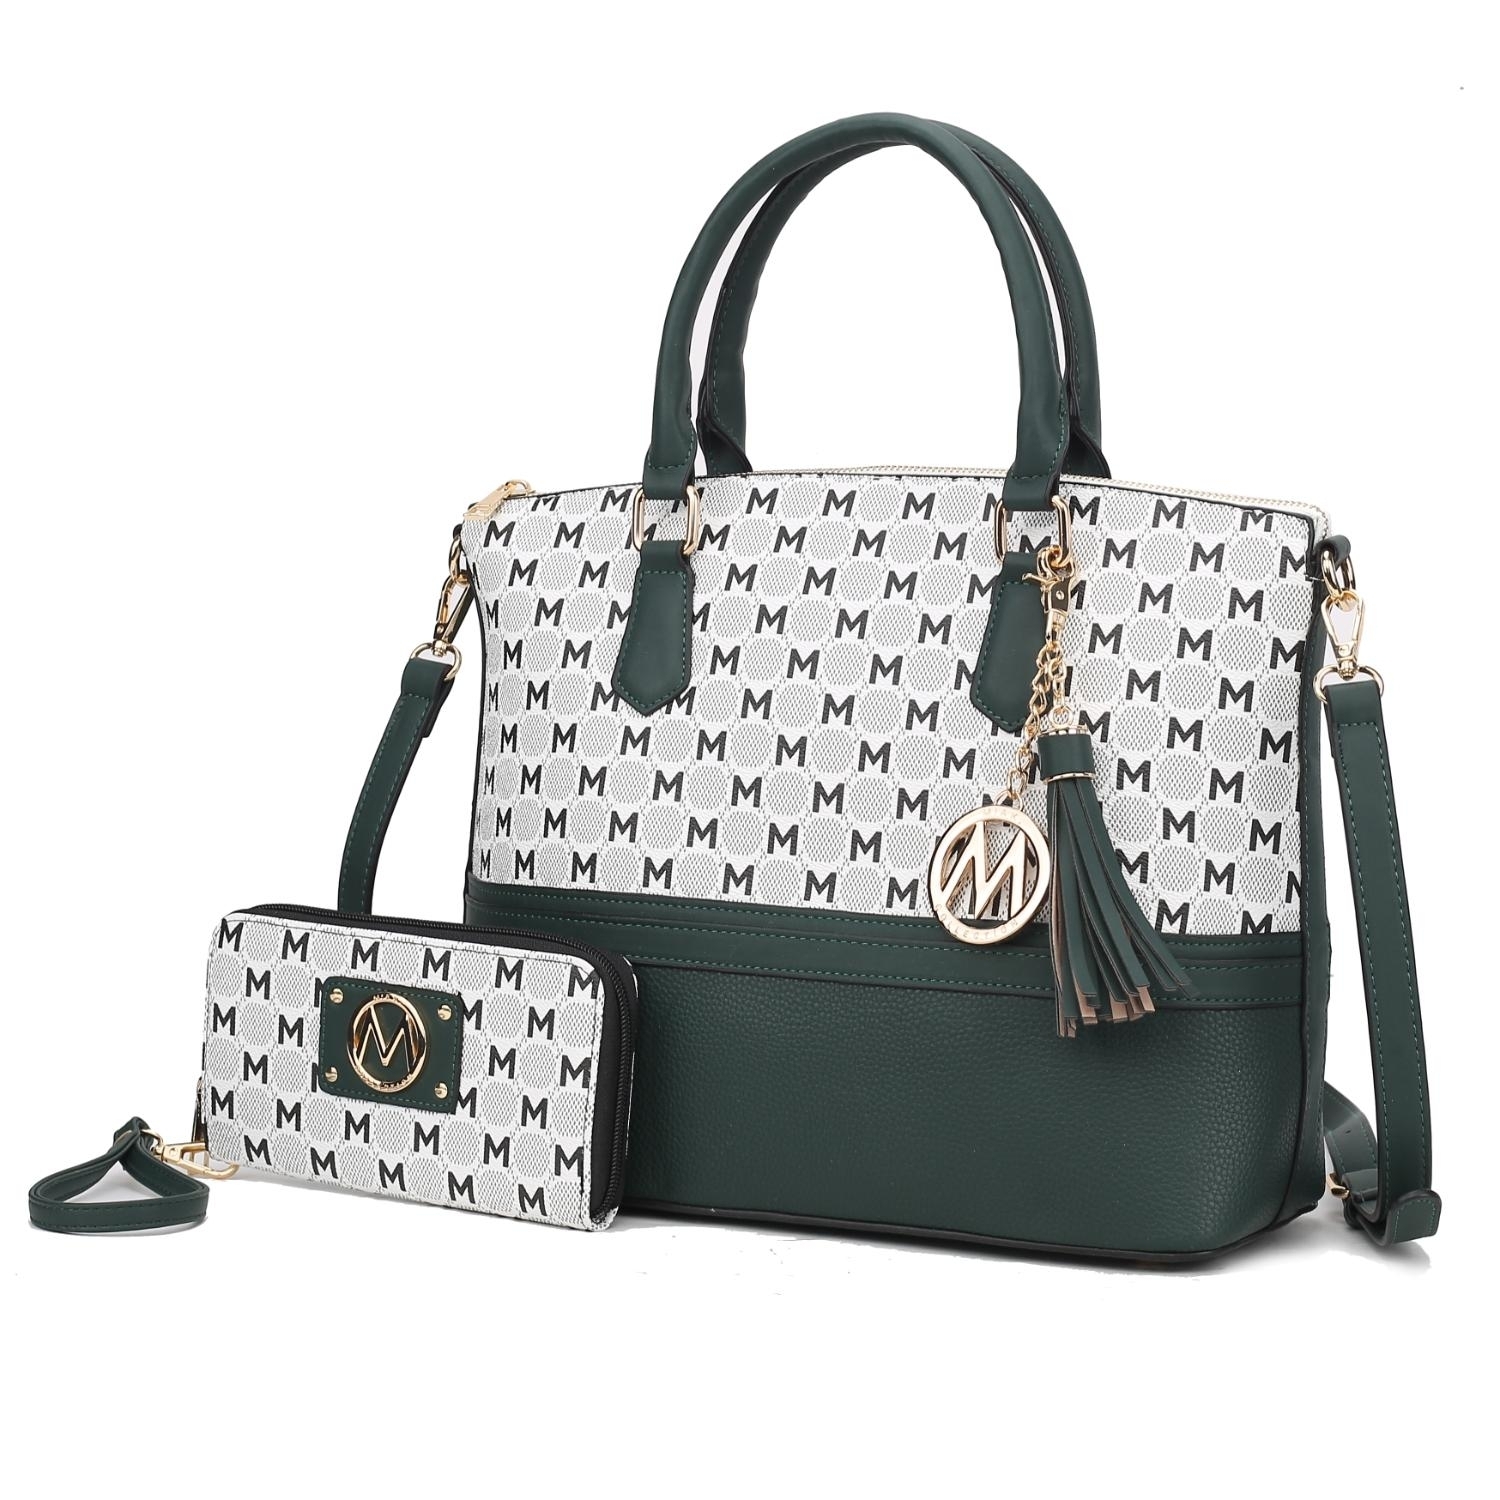 MKF Collection Saylor Circular M Emblem Print Women's Tote Bag With Matching Wristlet Wallet 2 Pieces By Mia K - Olive